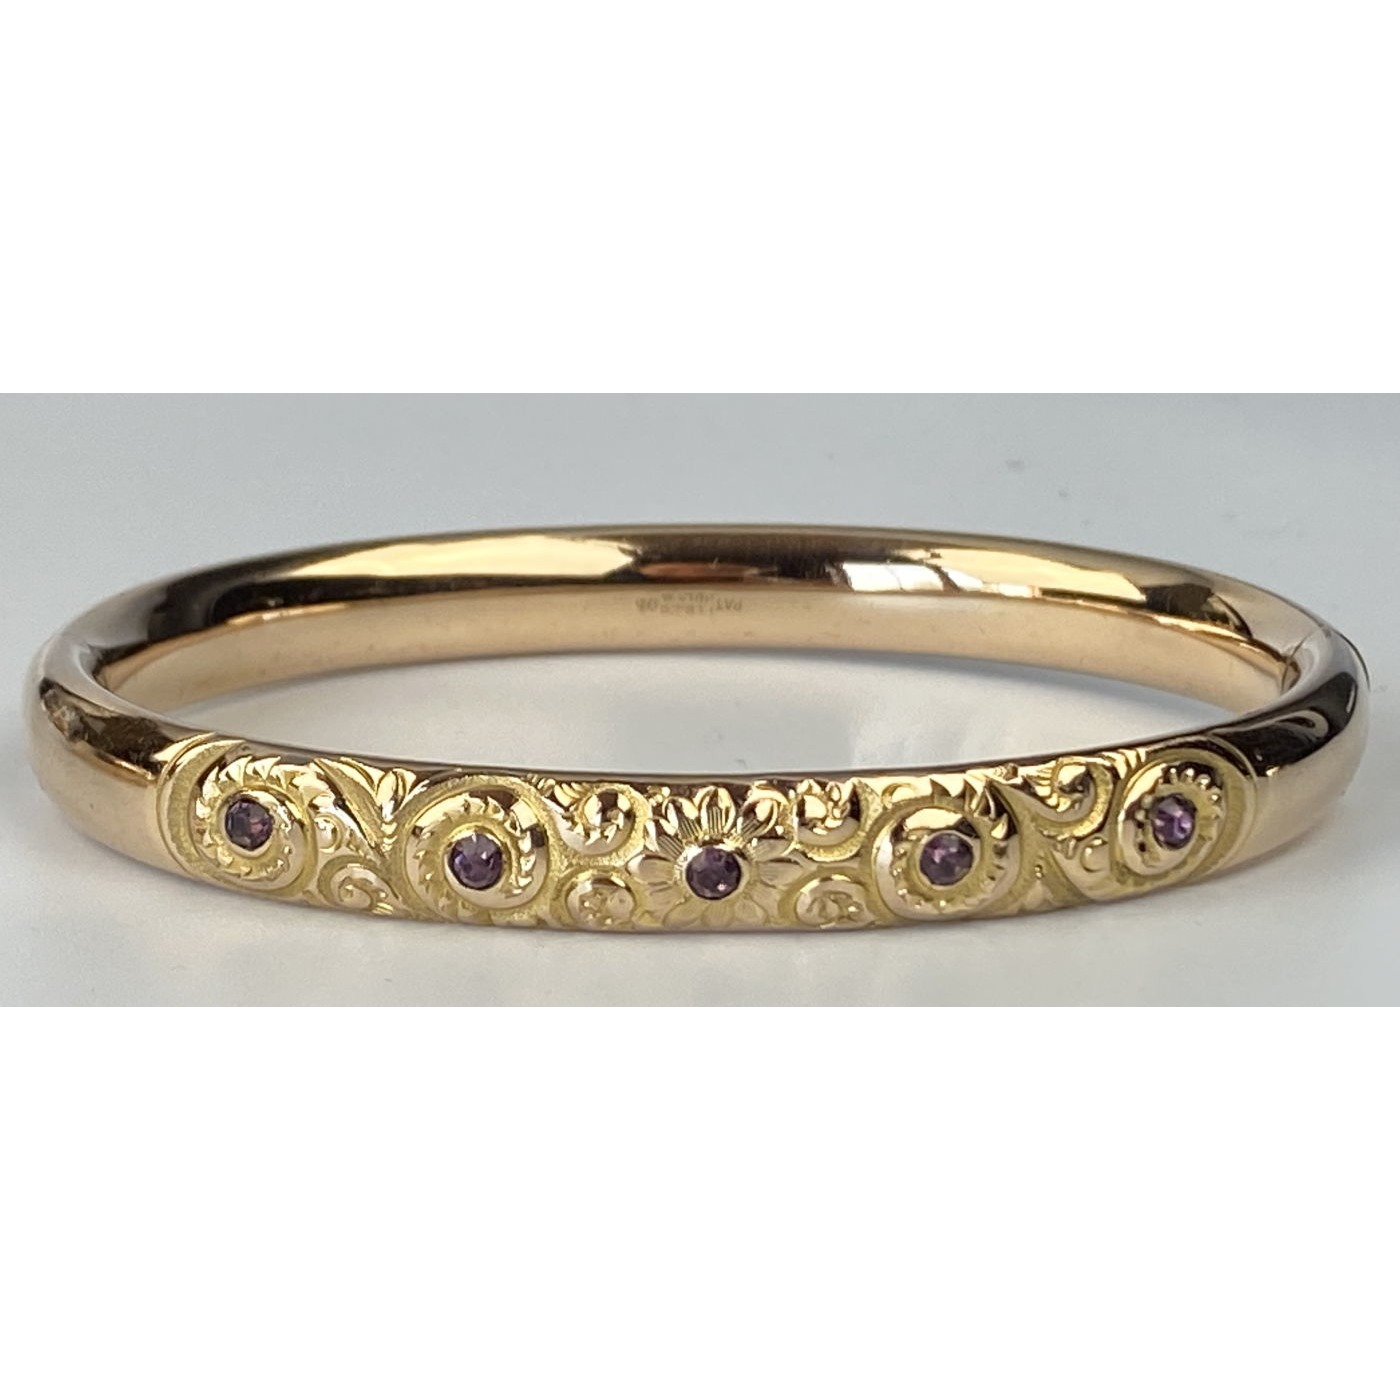 Stunning Deeply Engraved Engagement Bangle with Five Lavender Stones